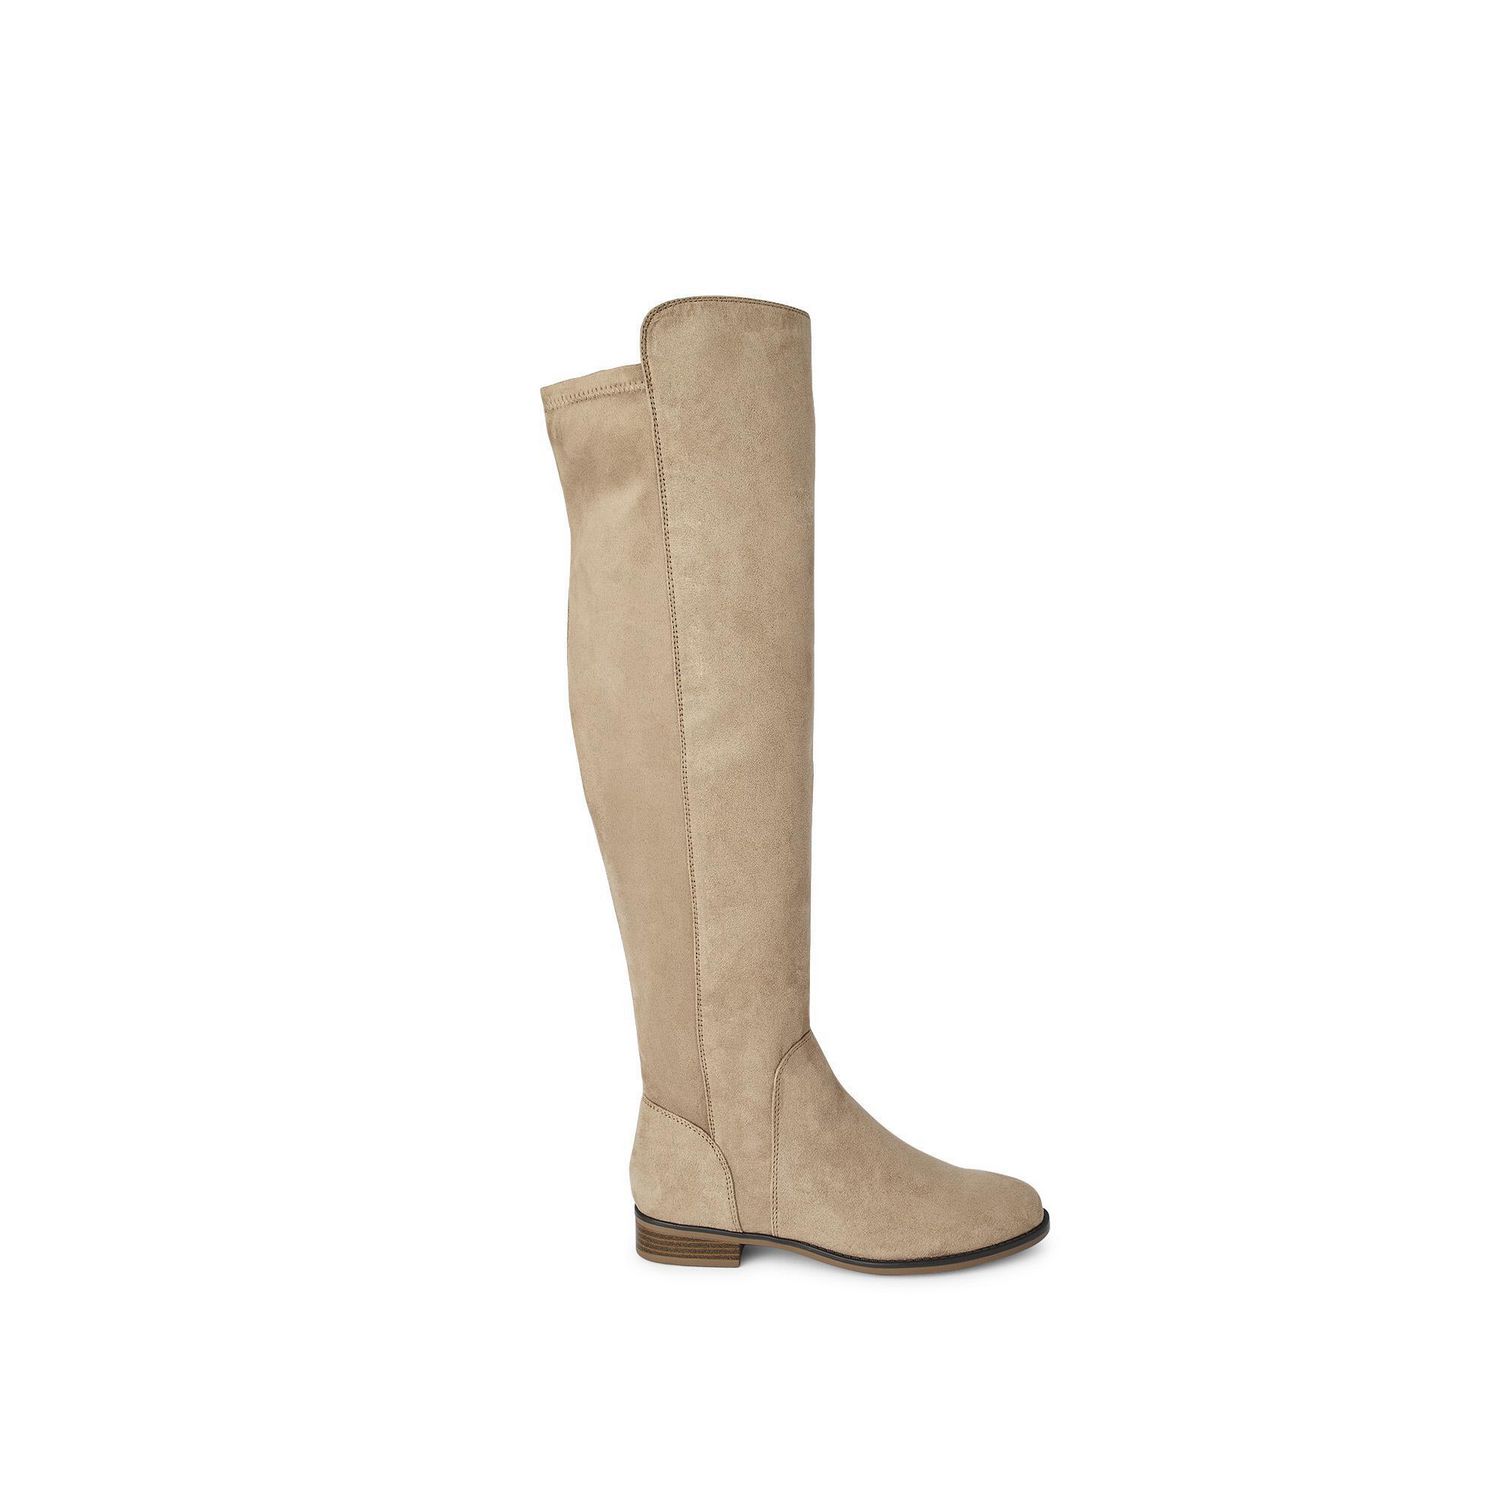 George Women's Cate Knee-High Boots 